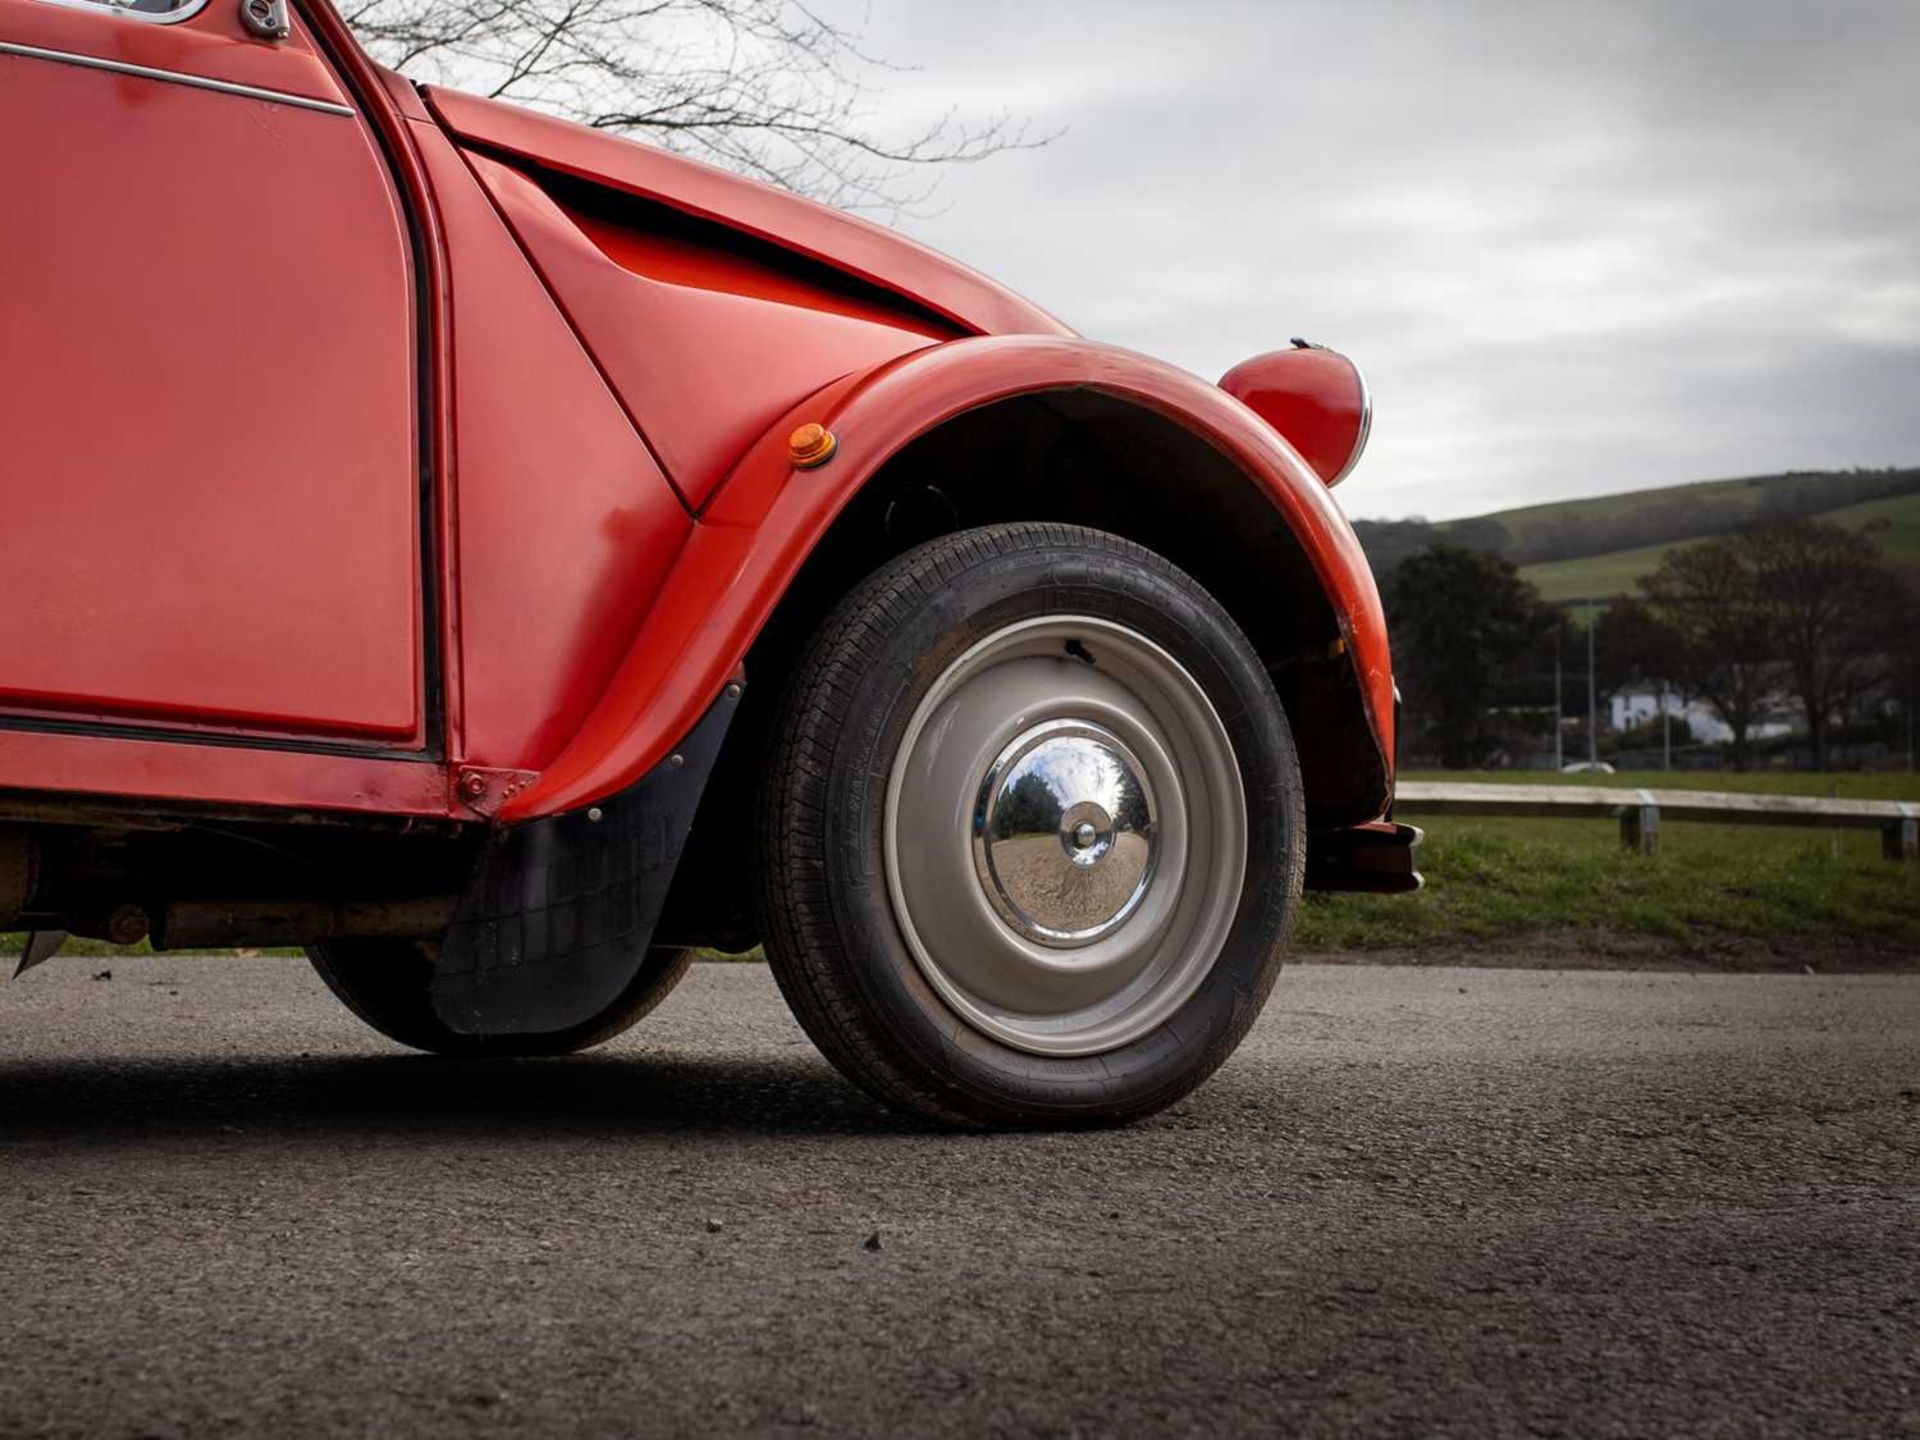 1989 Citroën 2CV6 Spécial Believed to have covered a credible 15,000 miles - Image 97 of 113